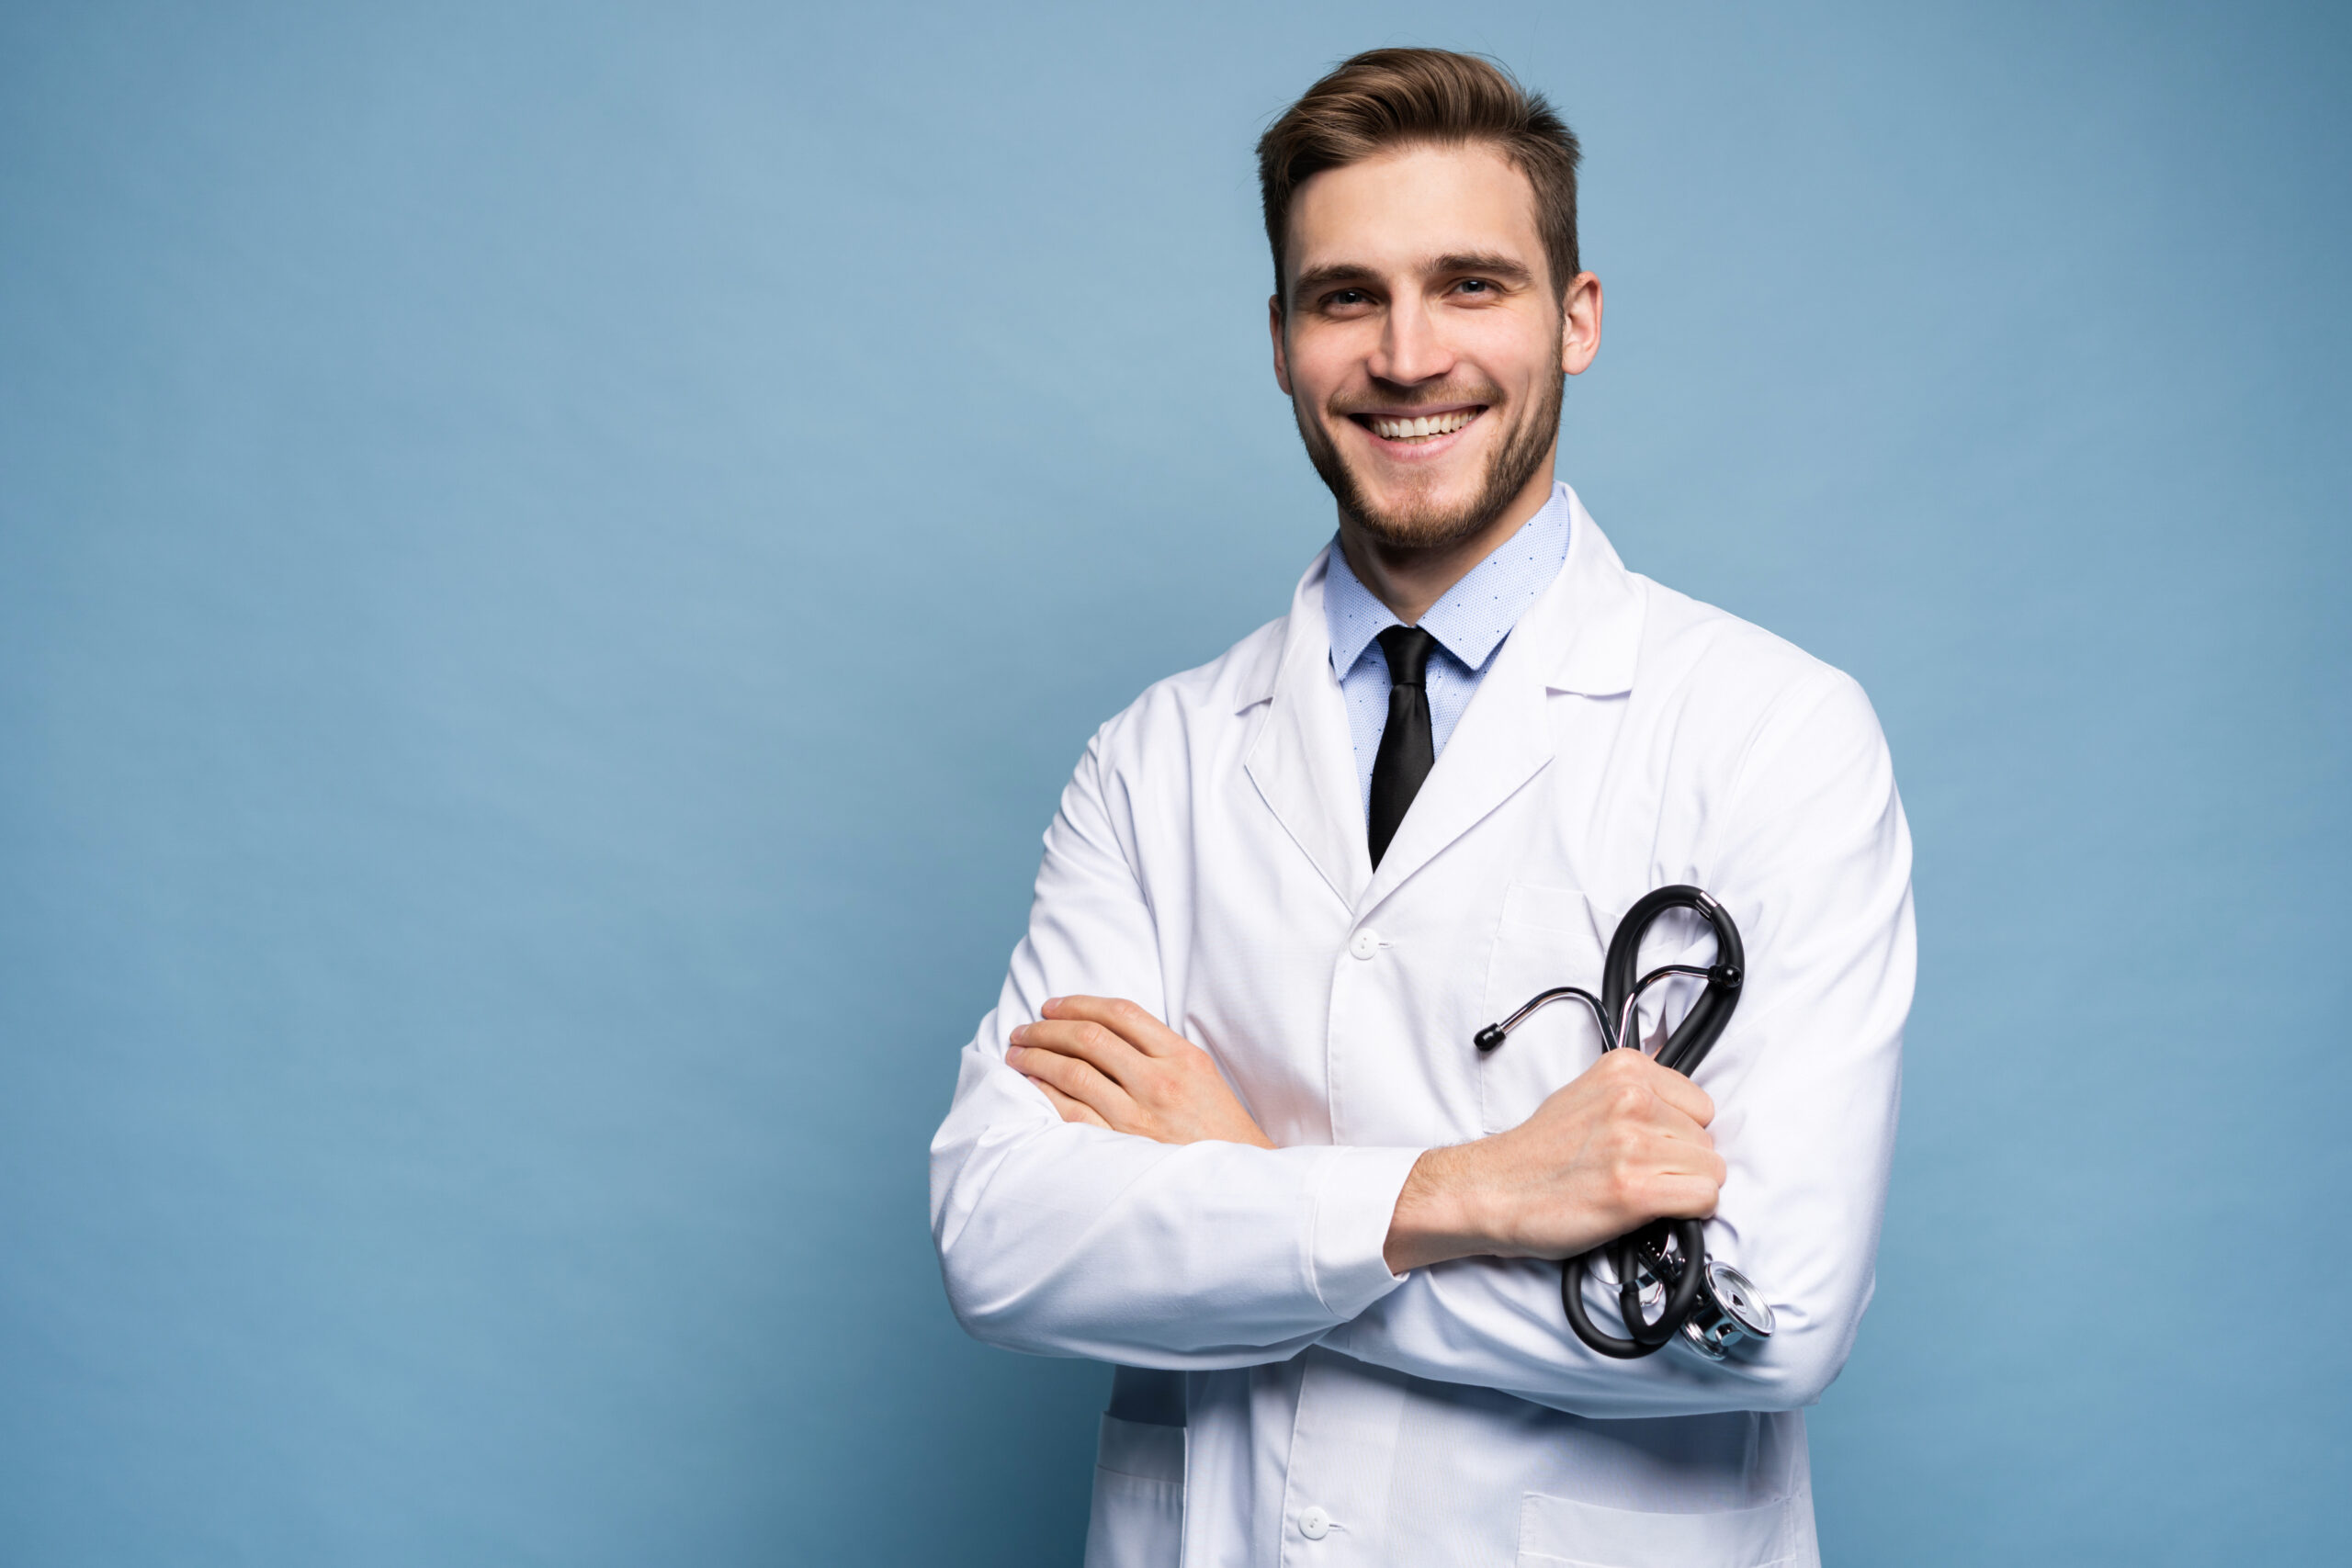 Portrait of confident young male medical doctor on blue background.